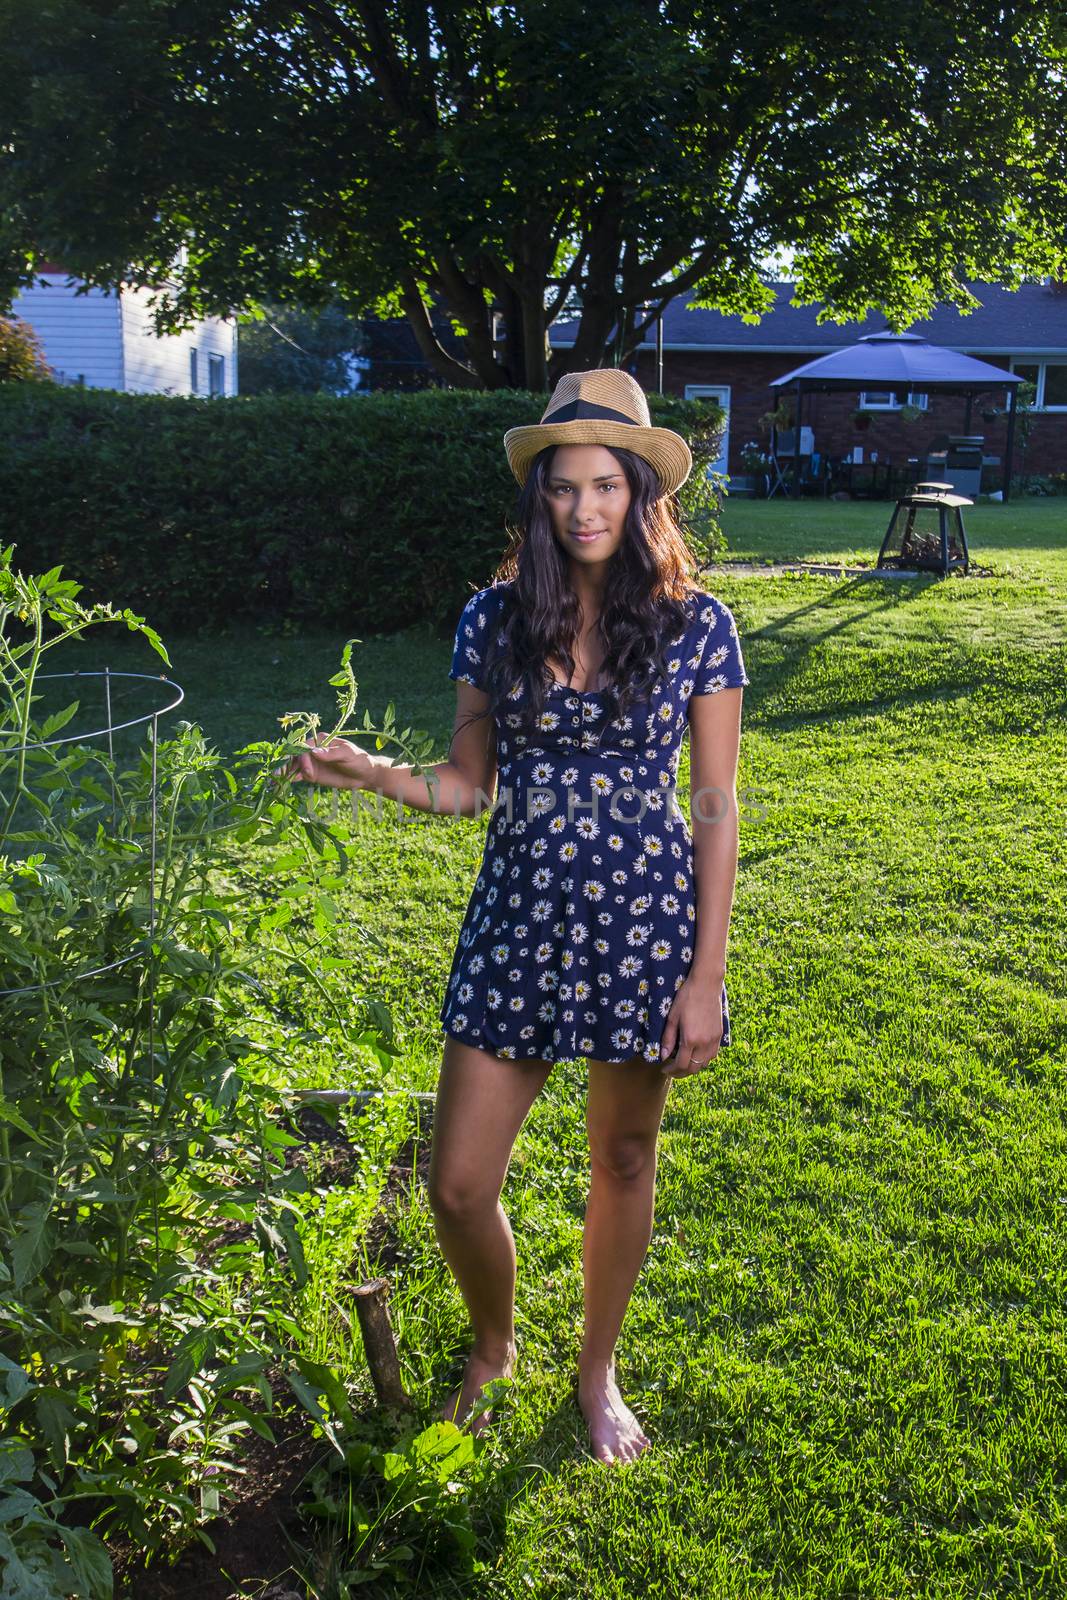 twenty something woman standing outside in the sun, wearing a sun dress and a straw hat beside of a tomato plant